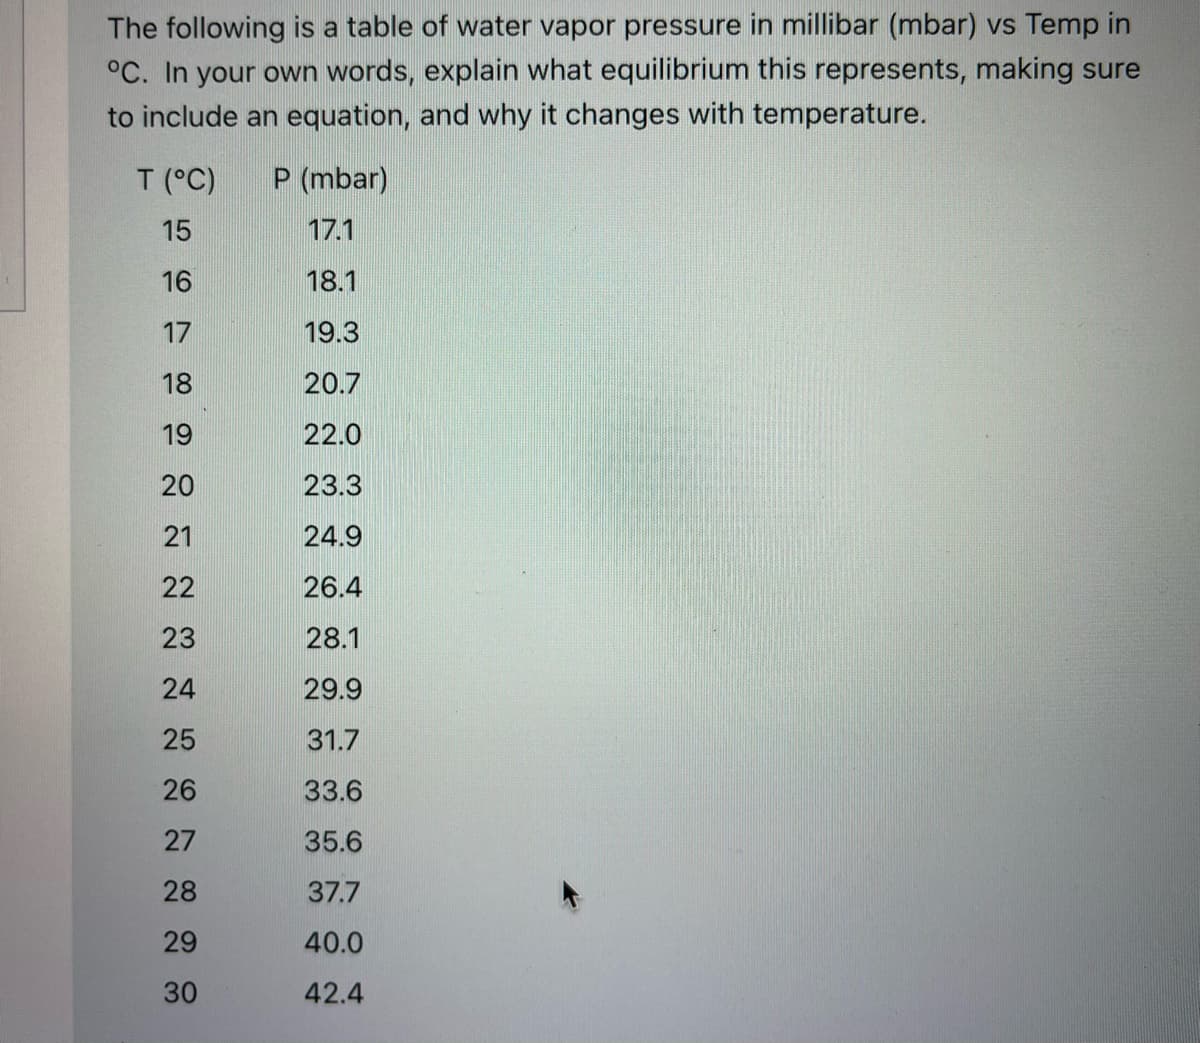 The following is a table of water vapor pressure in millibar (mbar) vs Temp in
°C. In your own words, explain what equilibrium this represents, making sure
to include an equation, and why it changes with temperature.
T (°C)
P (mbar)
15
17.1
16
18.1
17
19.3
18
20.7
19
22.0
20
23.3
21
24.9
22
26.4
23
28.1
24
29.9
25
31.7
26
33.6
27
35.6
28
37.7
29
40.0
30
42.4
